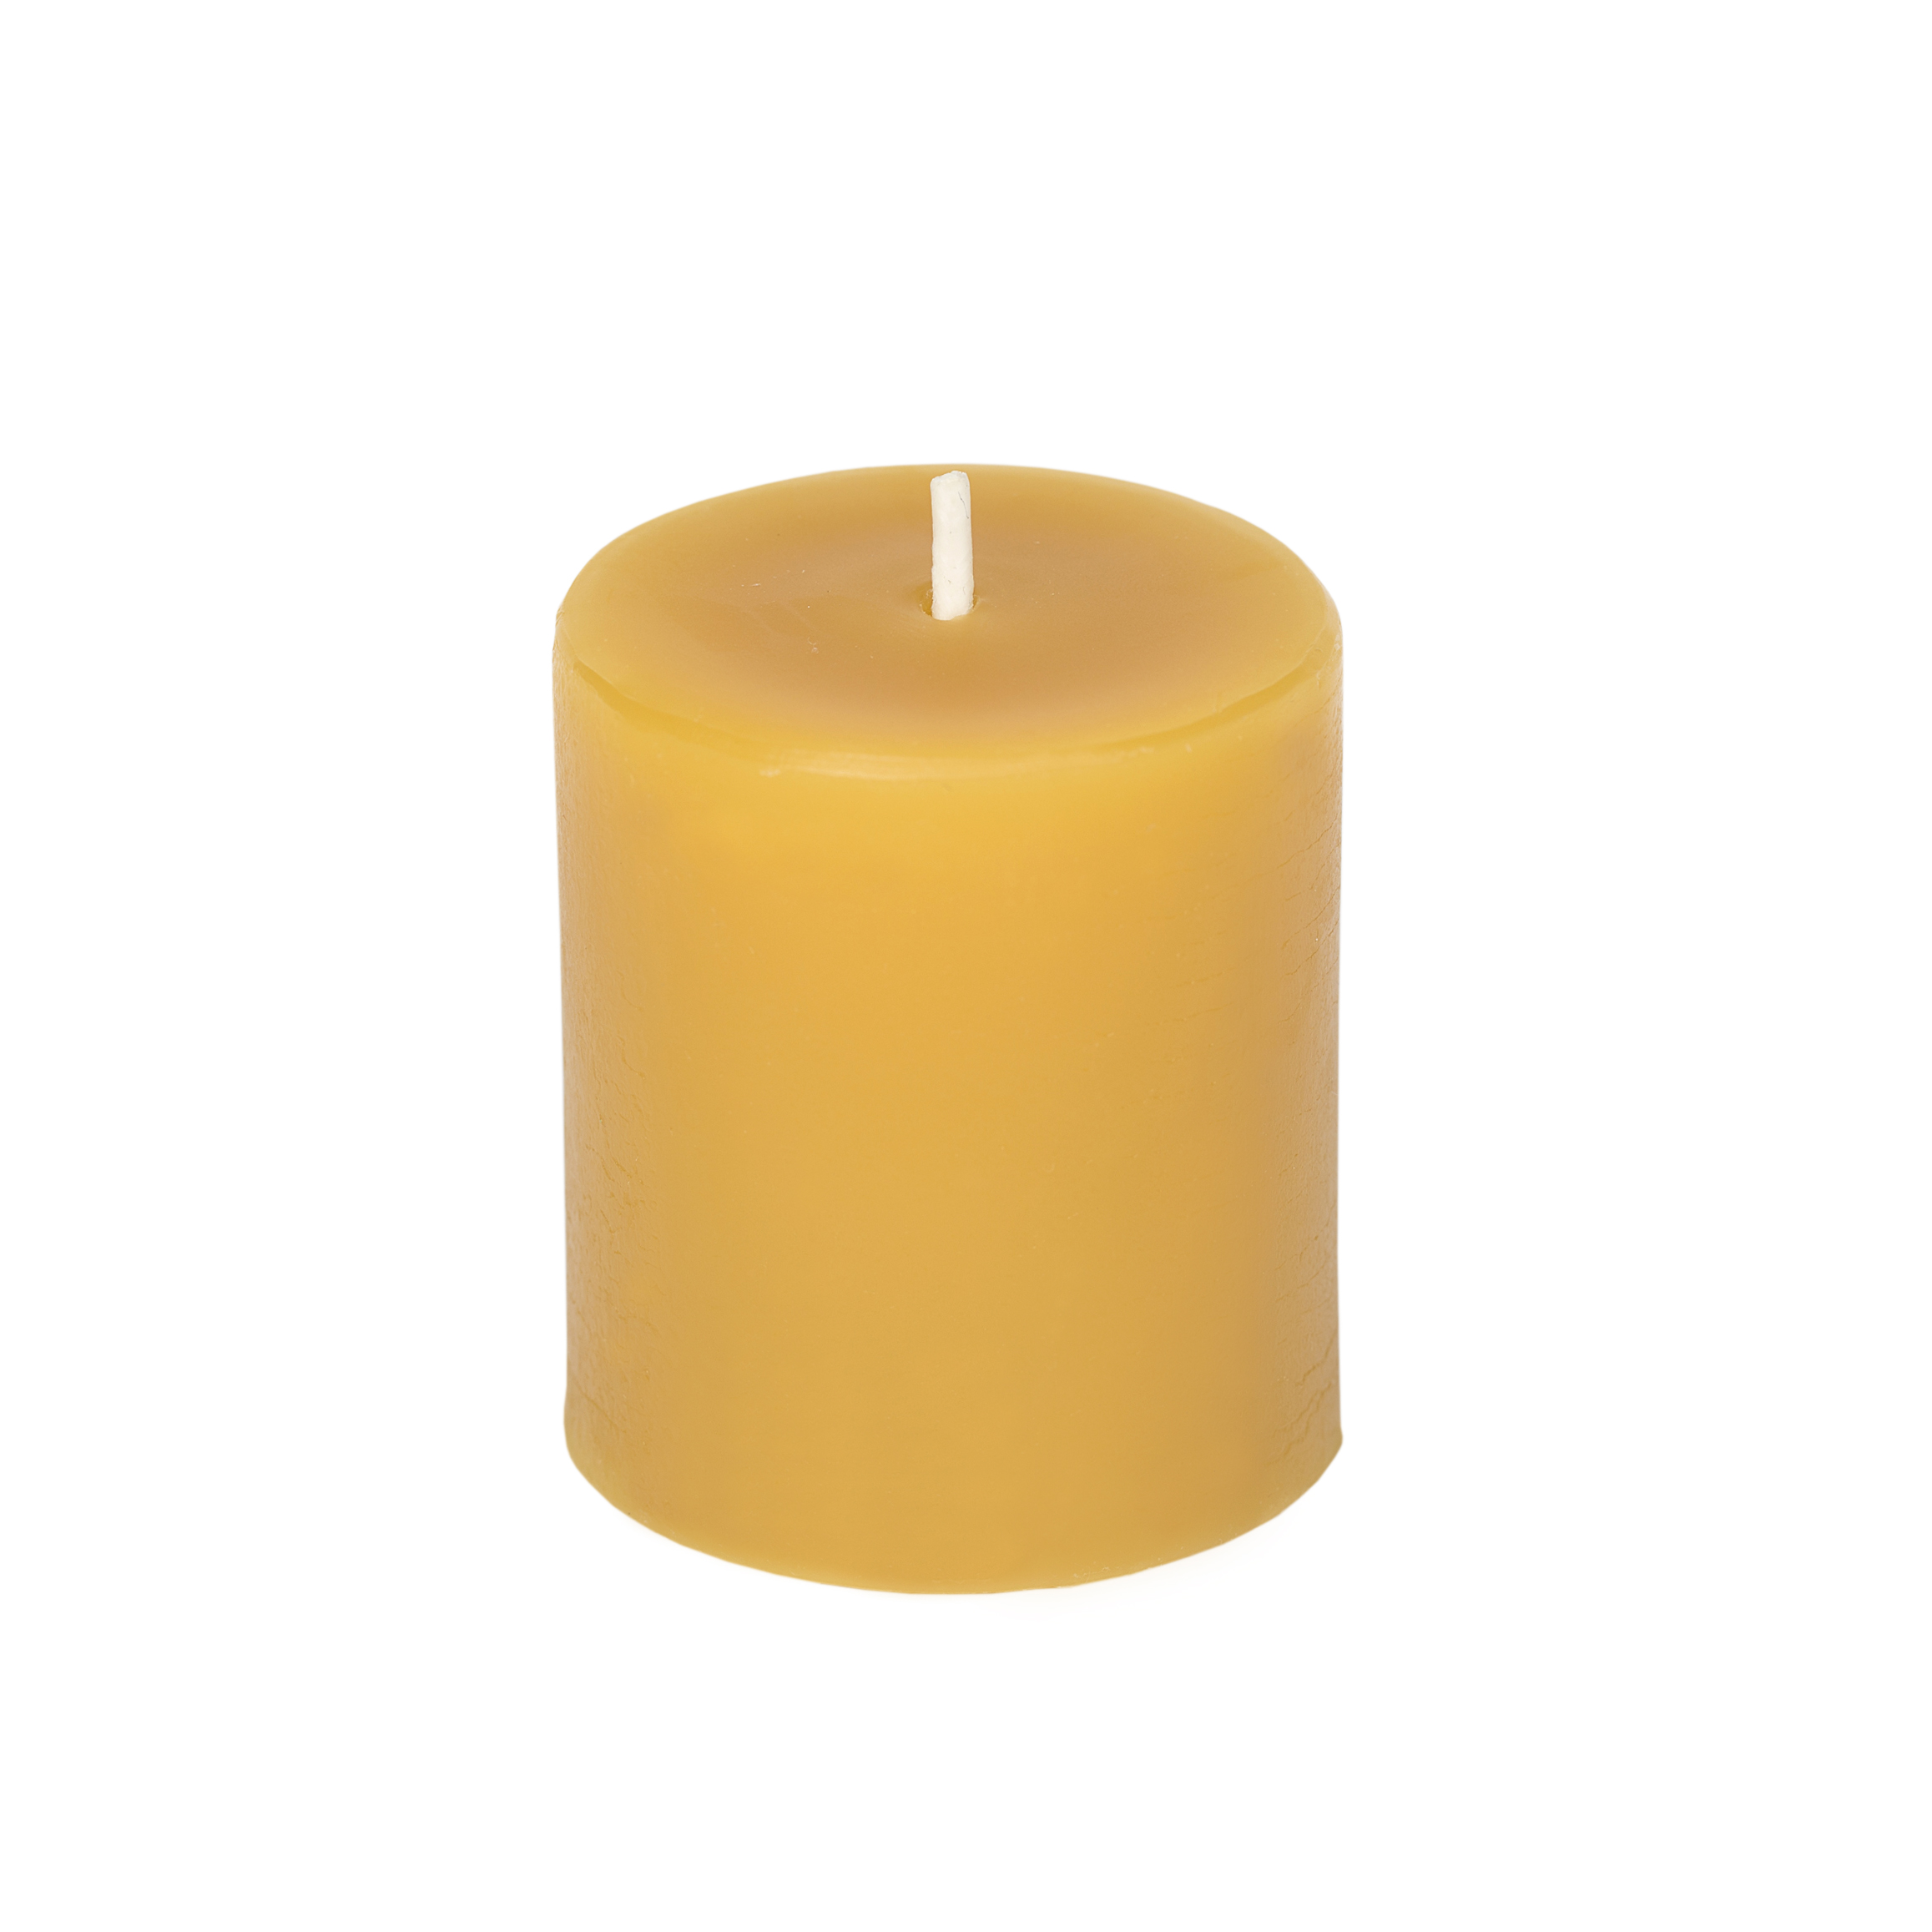 5 100% Pure Natural English Beeswax Votive Candles Unscented 35mm x 45mm